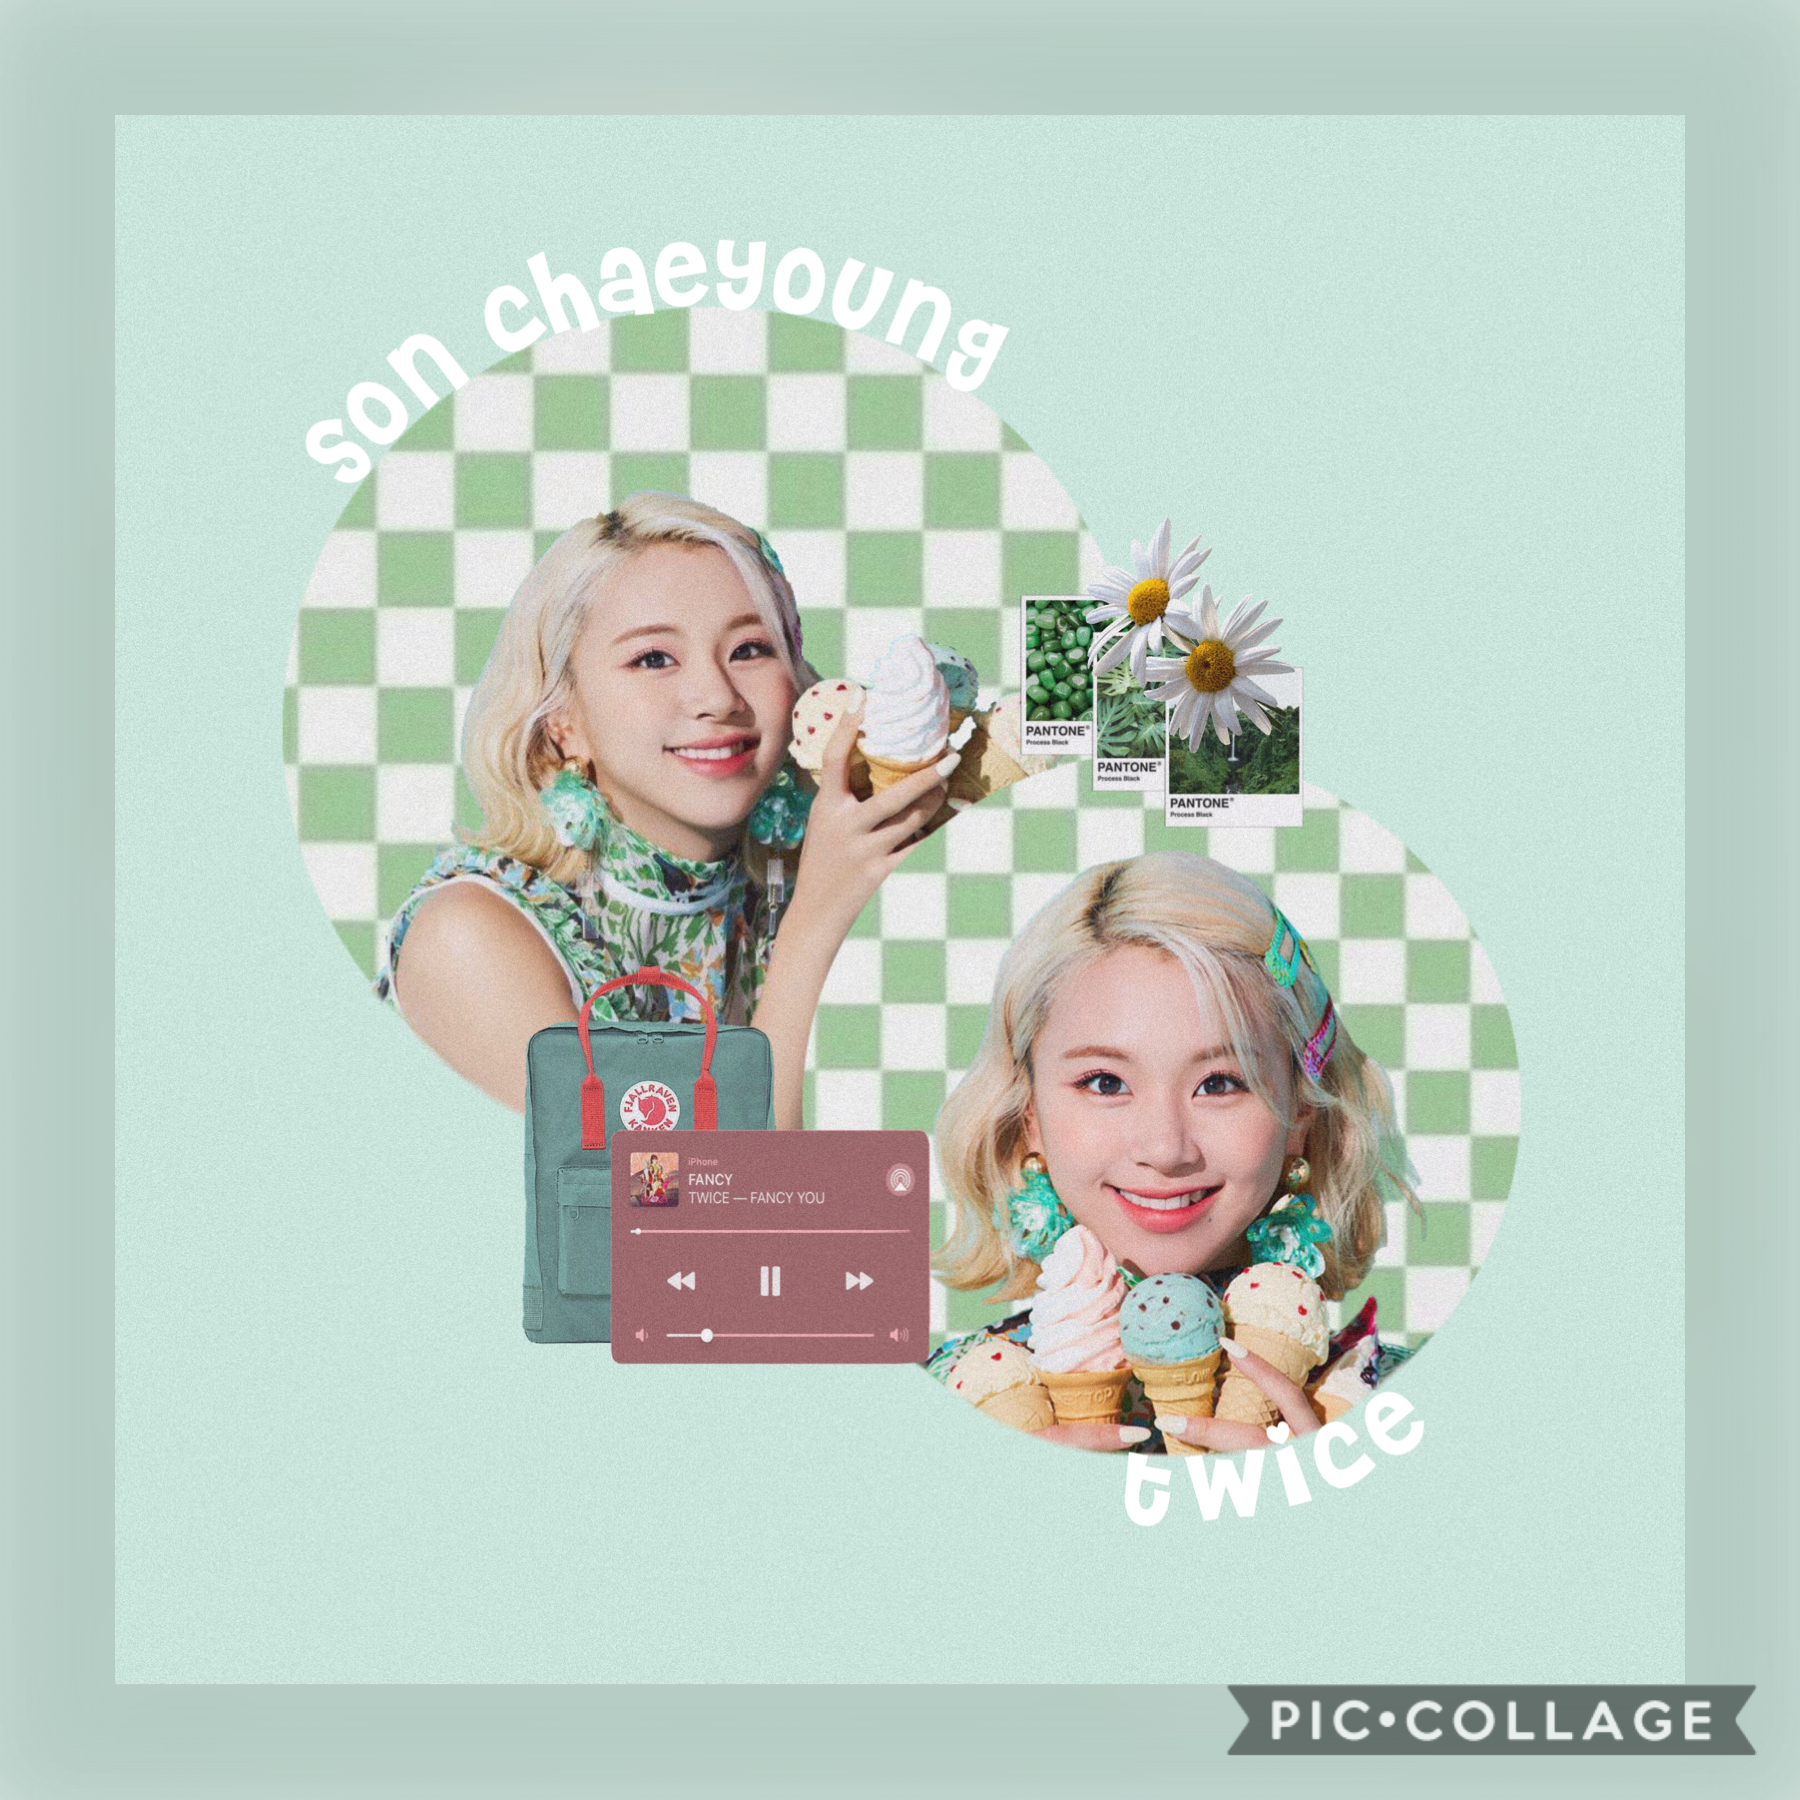 💚
happy birthday chaeyoung~
expect another edit coming soon :))
stay safe 💚
i fancy y’all 🤟🏼